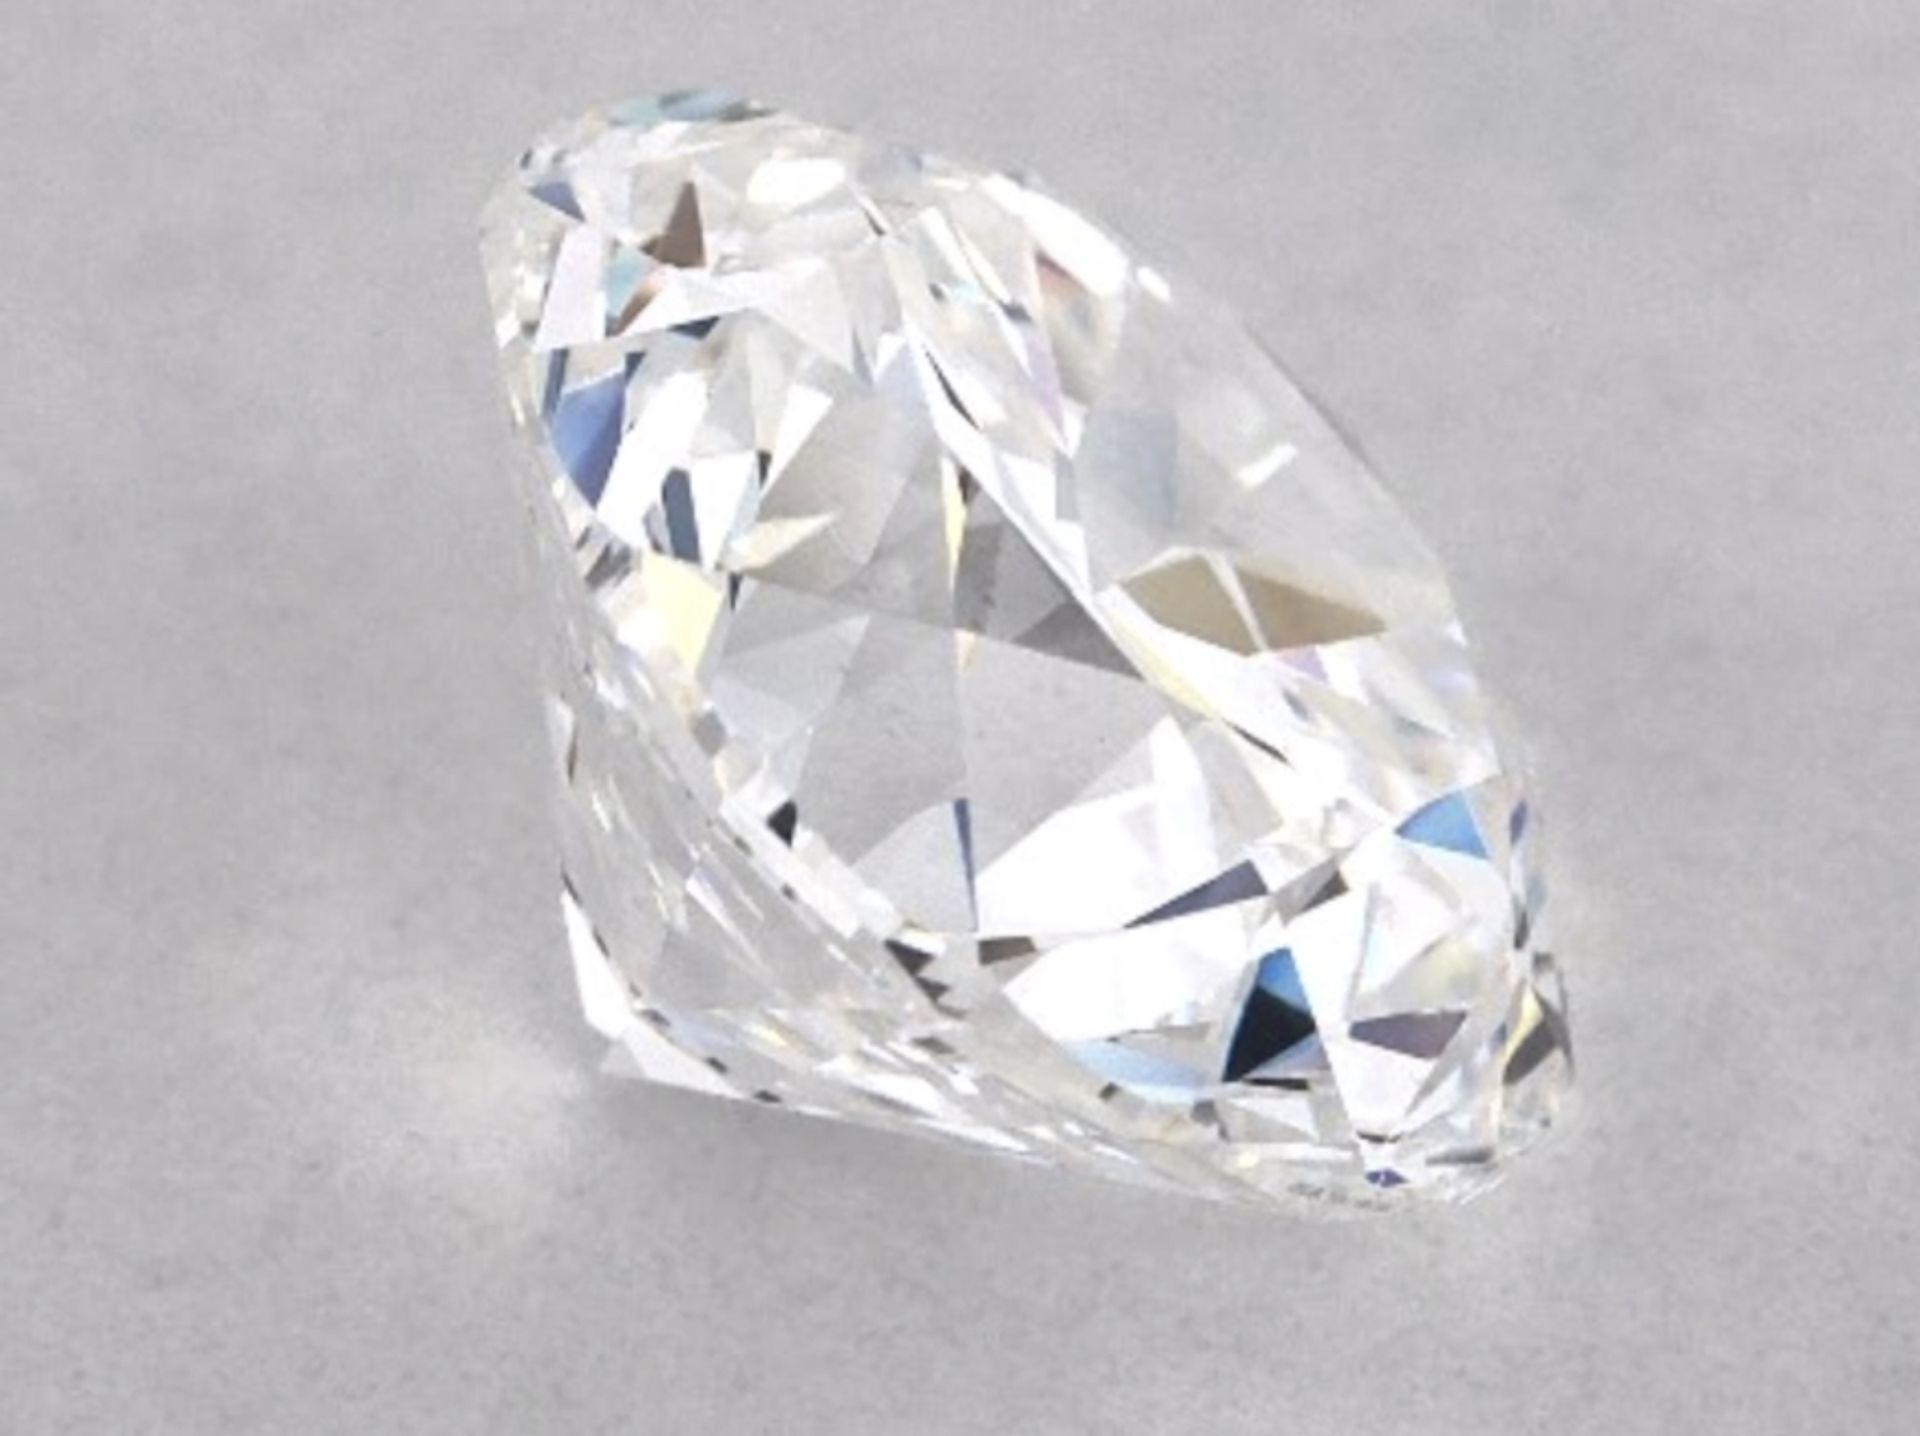 ** ON SALE ** Certified Brilliant Cut Diamond 2.03 CT ( Natural ) VS1 H colour - Full Certificate - Image 4 of 6